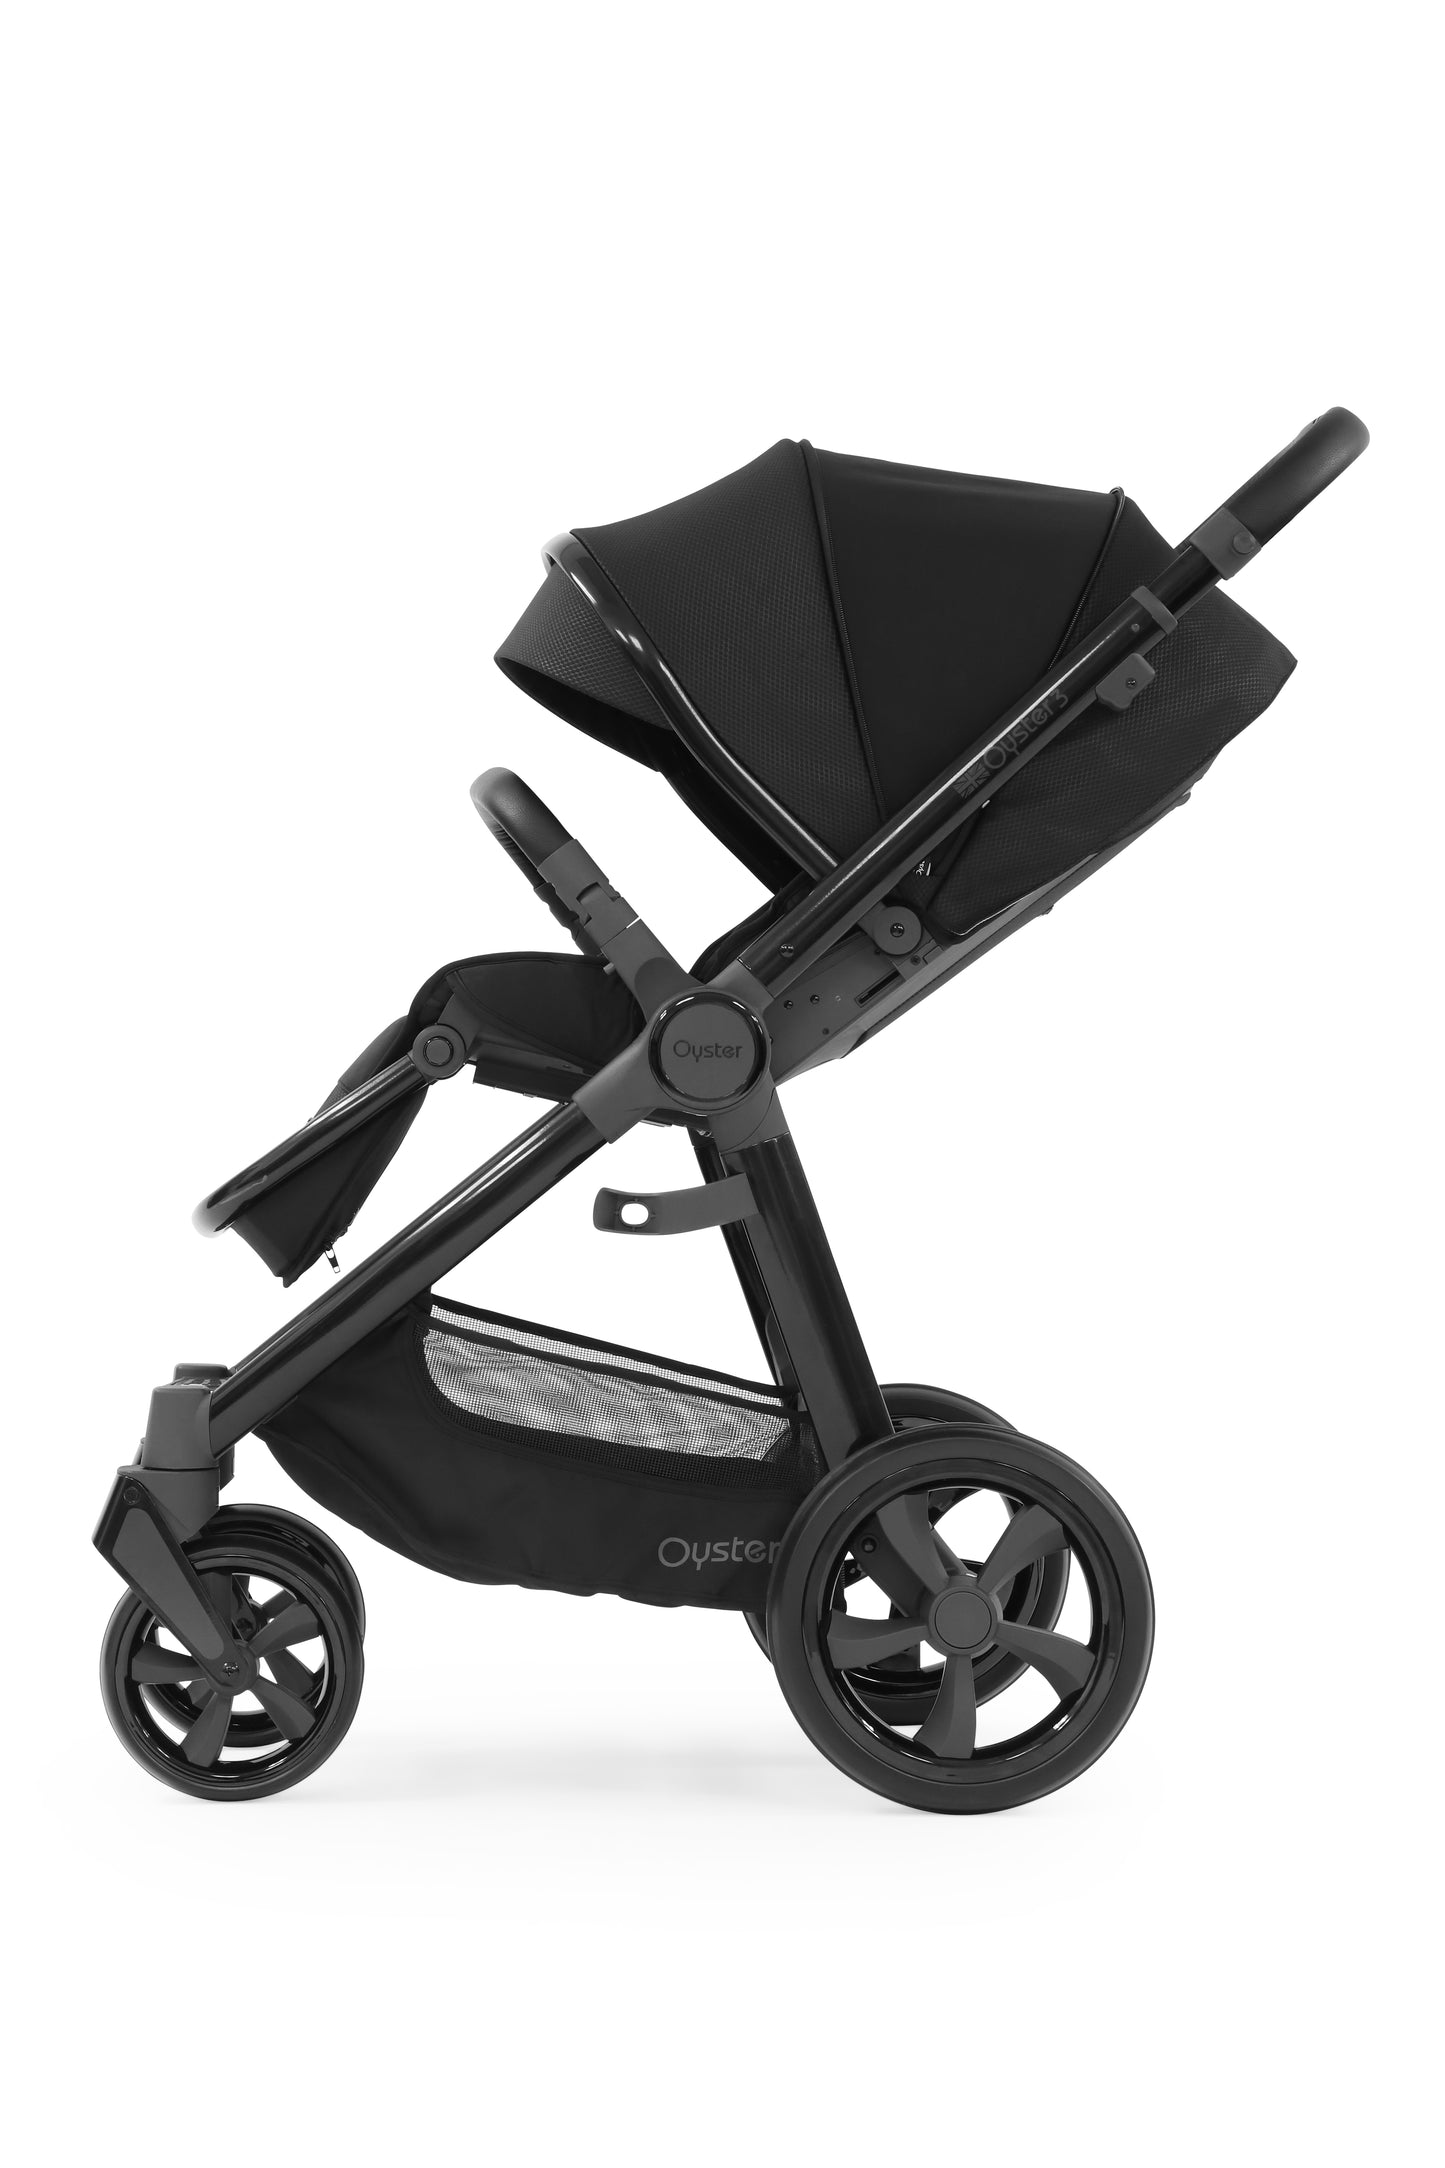 Oyster 3 Luxury 7 Piece Maxi Cosi Pebble 360 Pro i-Size Travel System | Pixel (Gloss Black Frame)